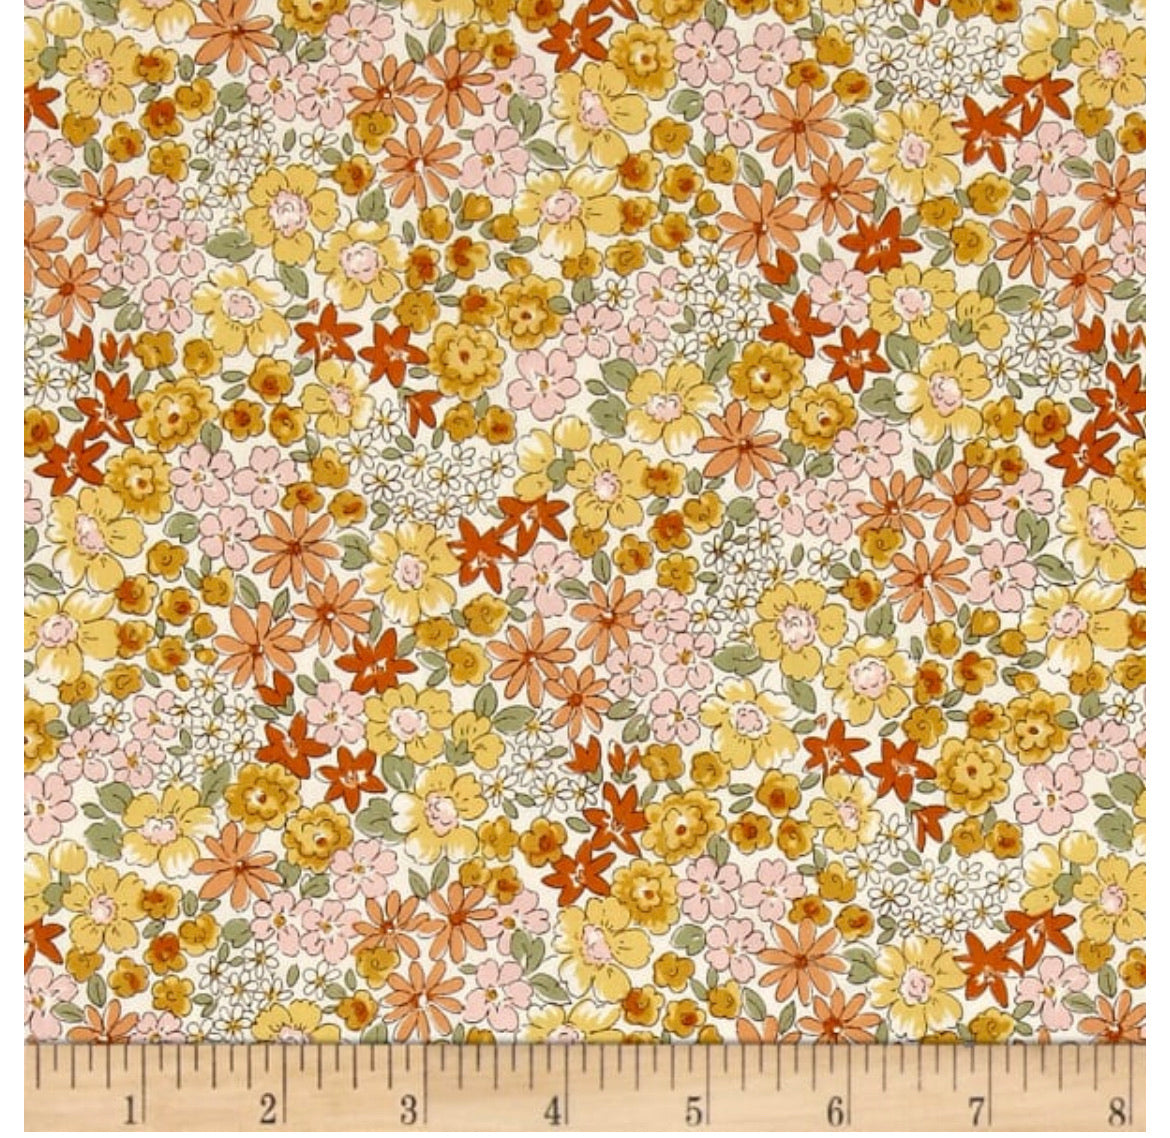 Fall Floral Fabric By The Yard